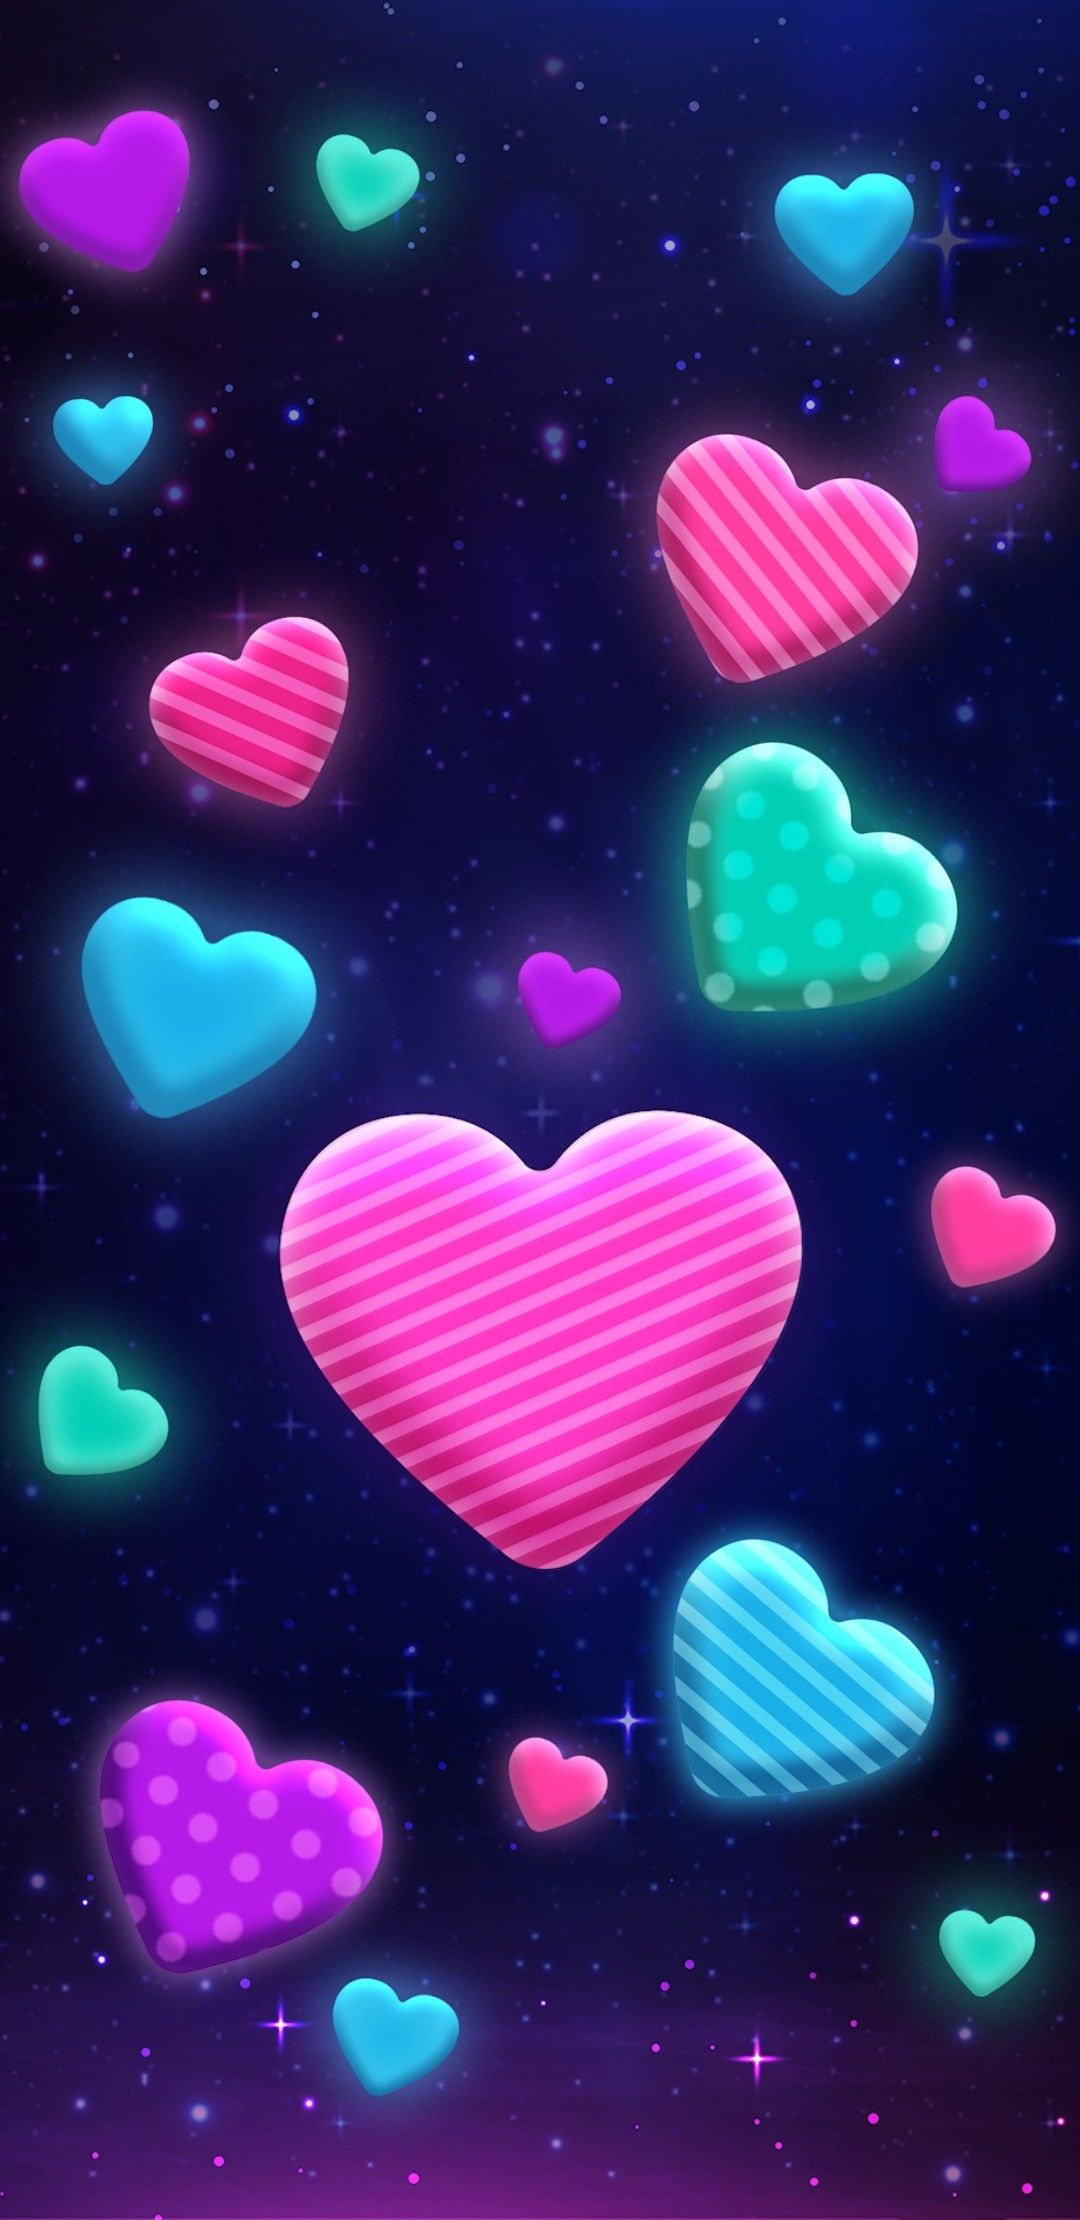 Heart iPhone Wallpapers on WallpaperDog